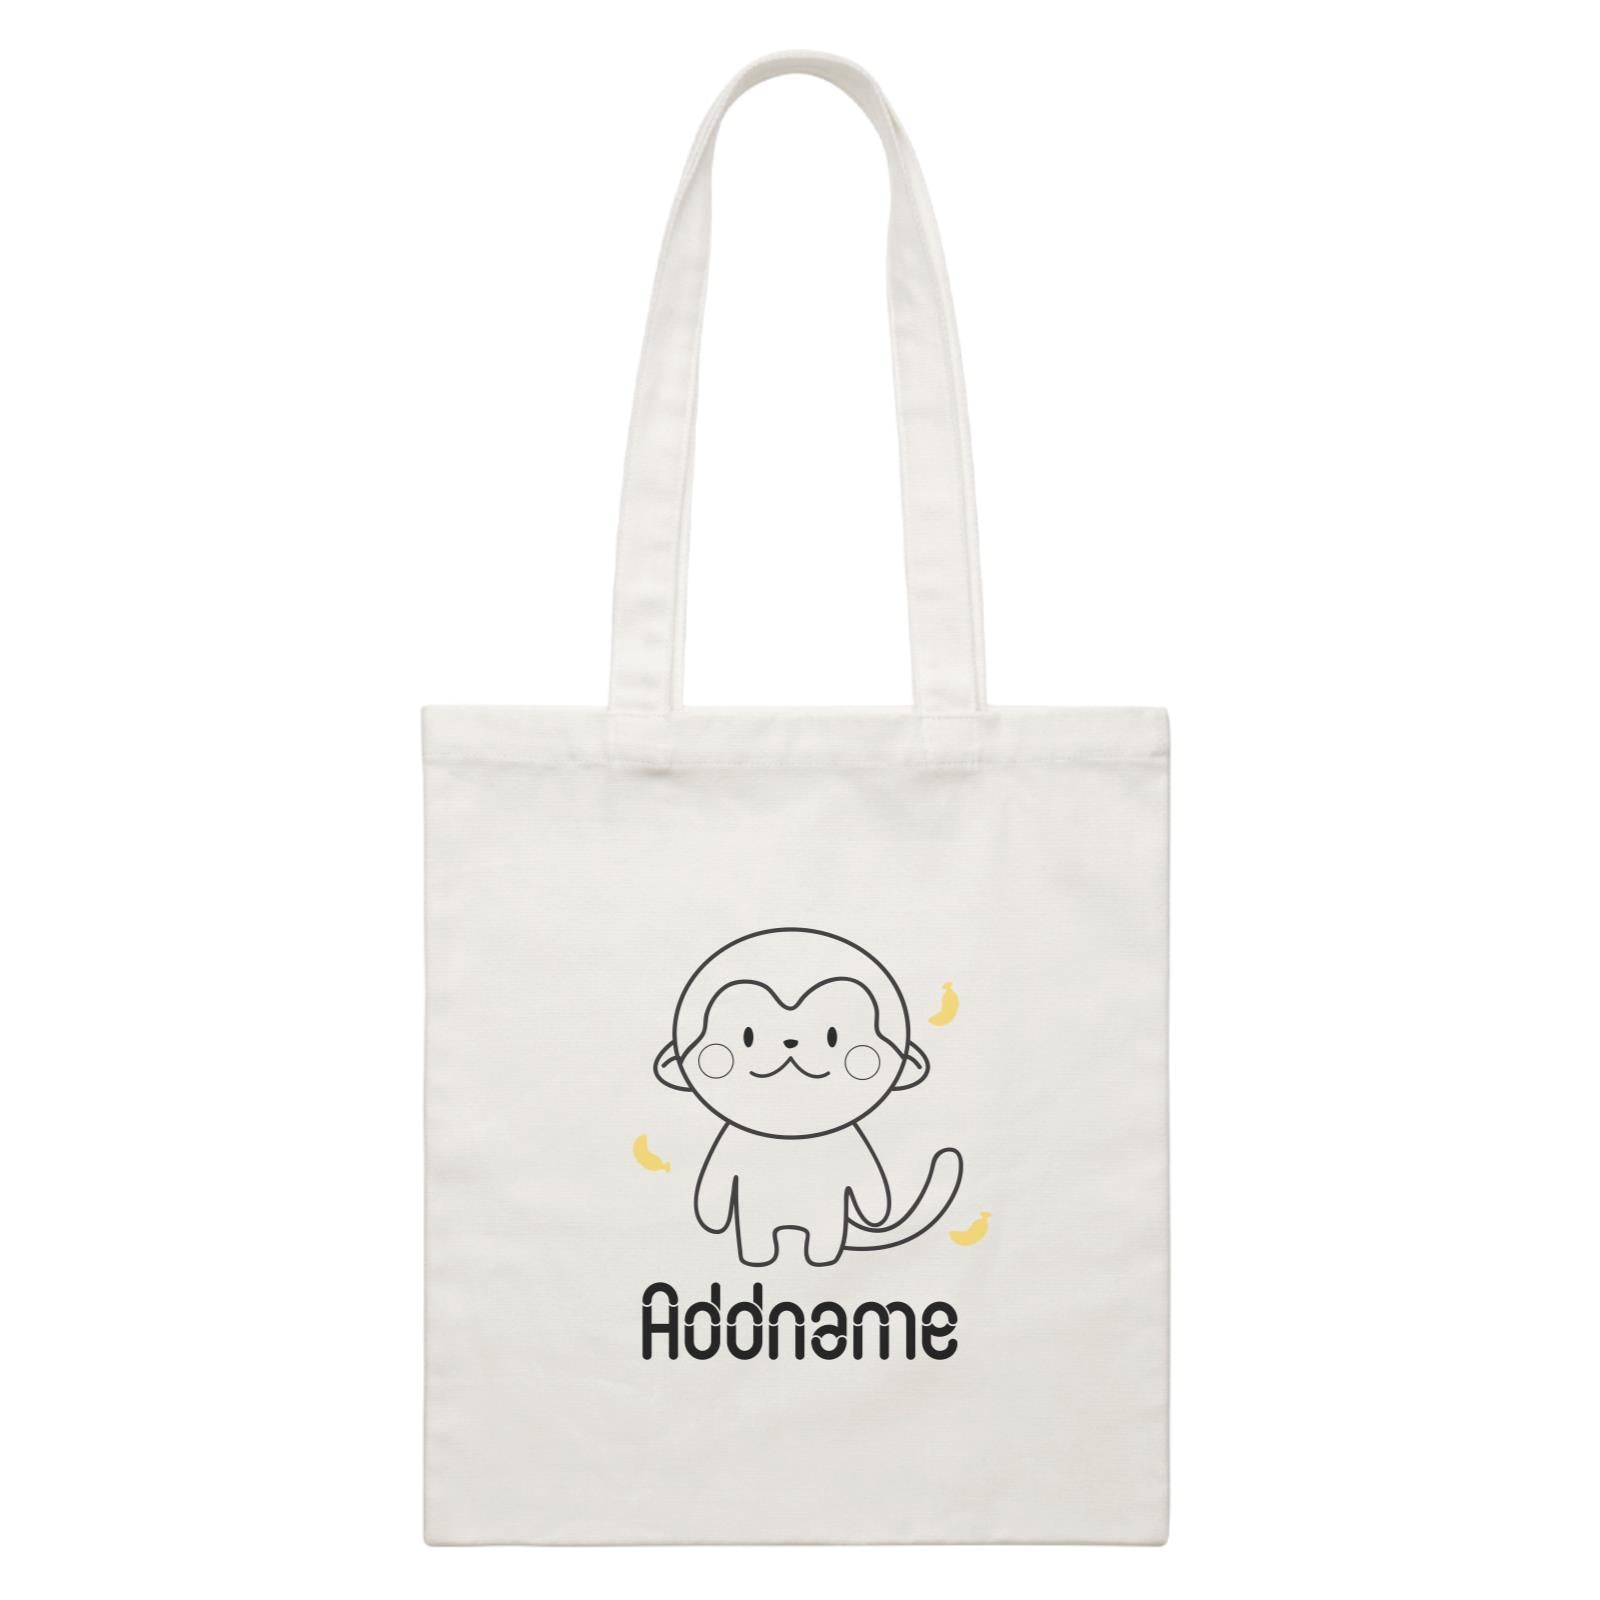 Coloring Outline Cute Hand Drawn Animals Furry Monkey Addname White White Canvas Bag